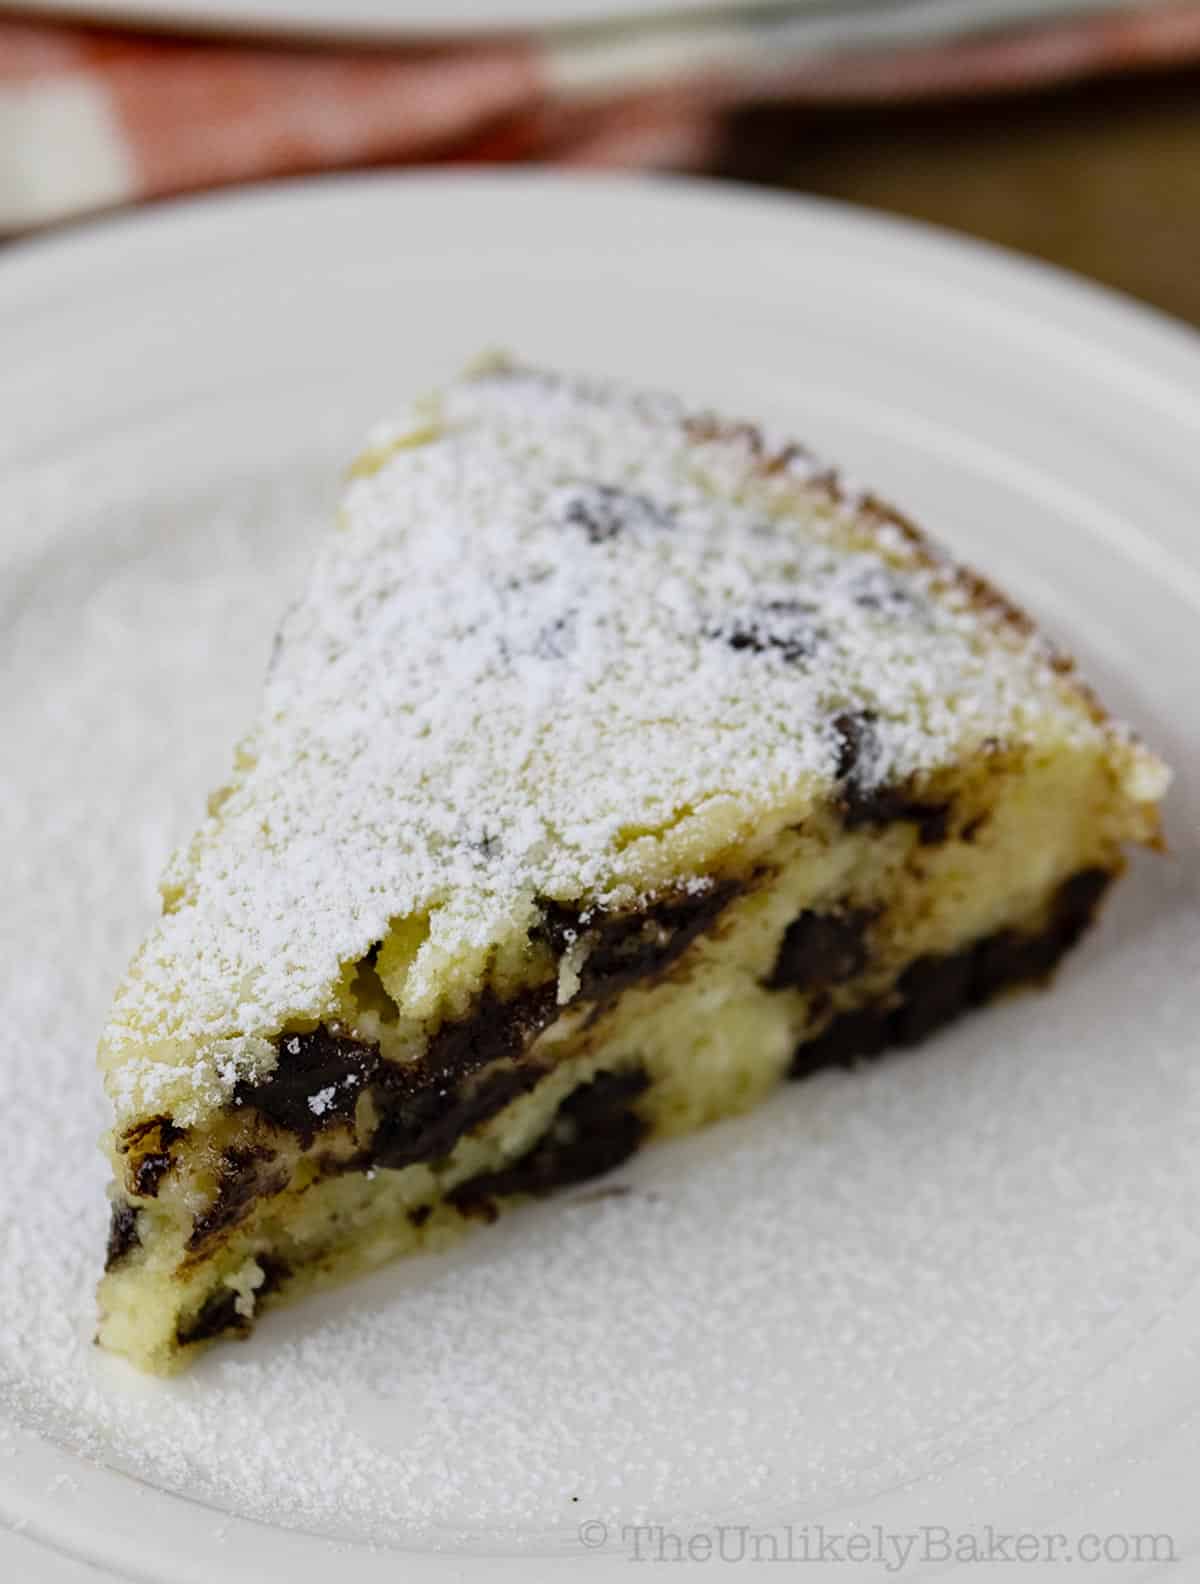 A slice of ricotta chocolate cake dusted with powdered sugar.